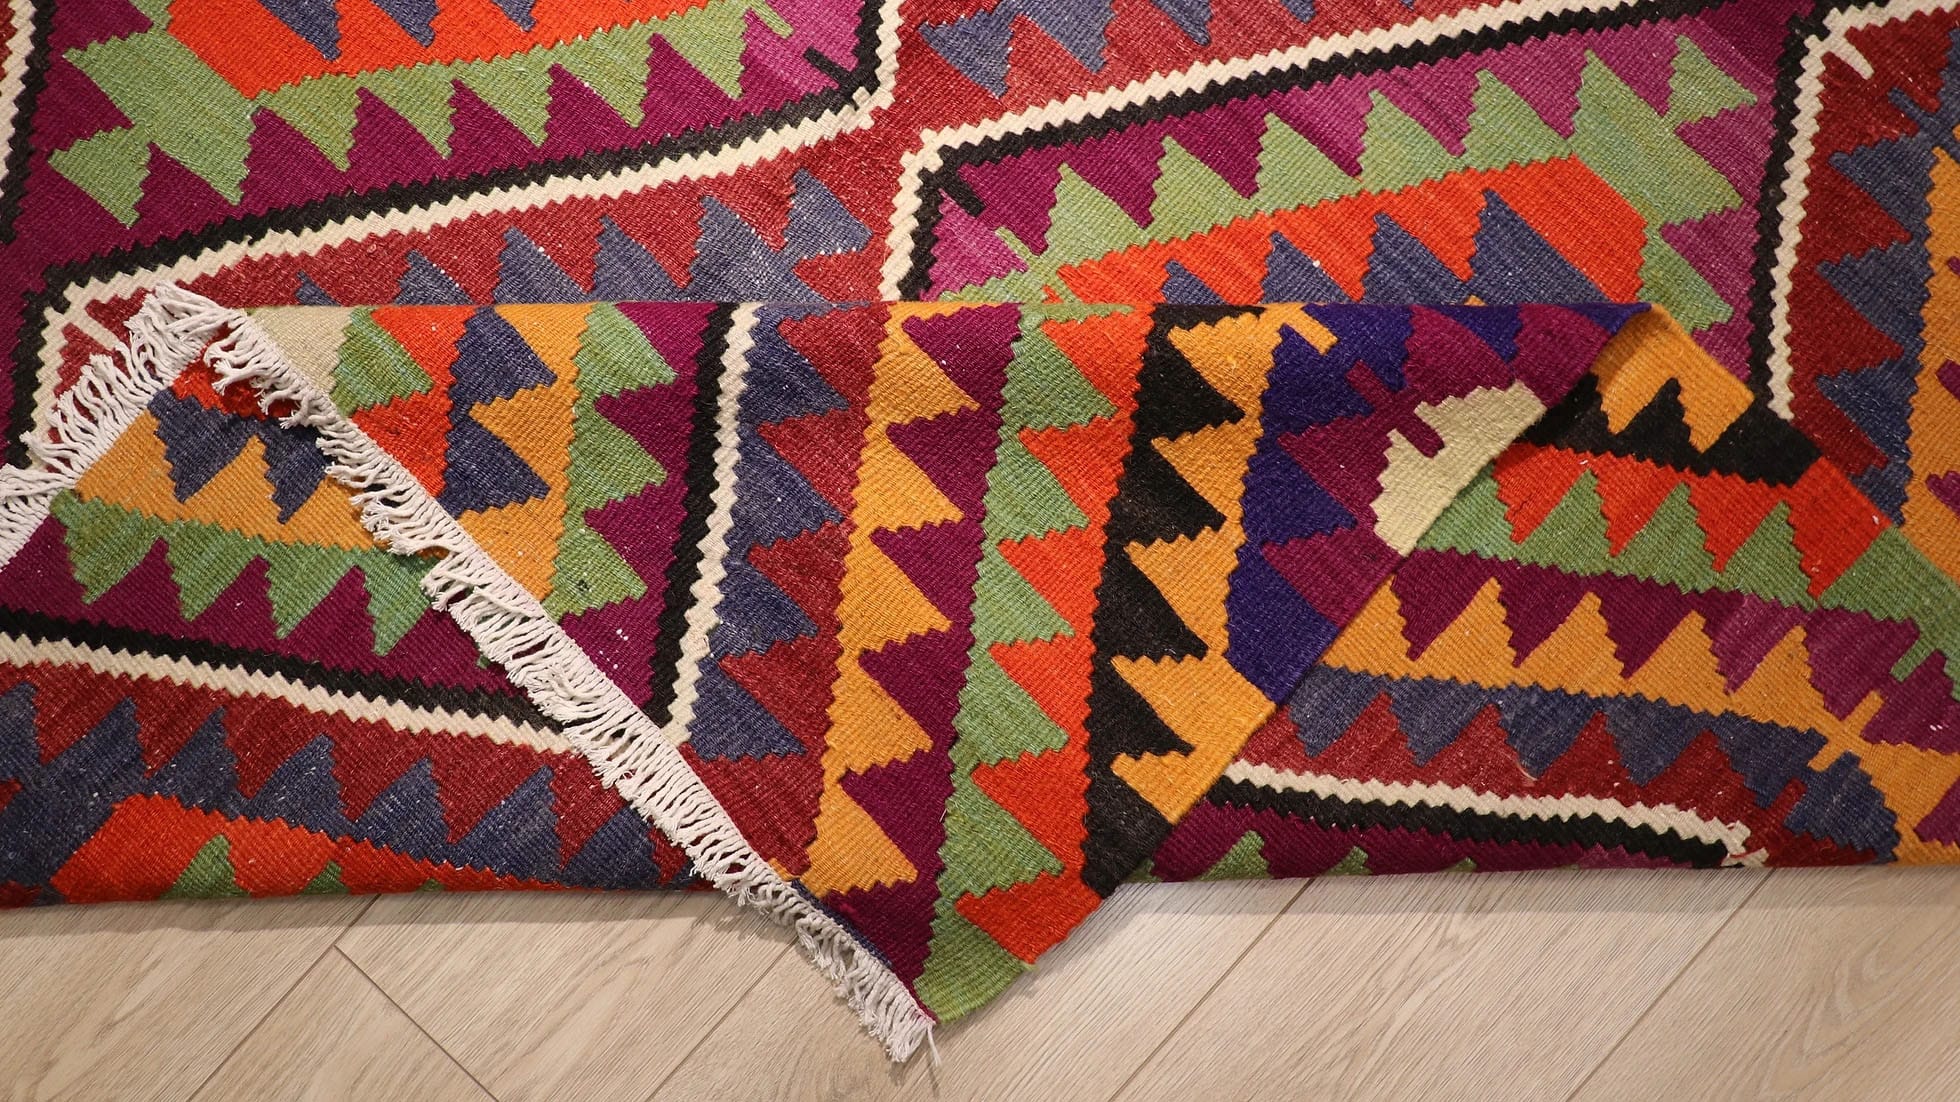 details of the beautiful handwoven Turkish kilim rug in traditional and tribal motifs made by nomadic women weavers 